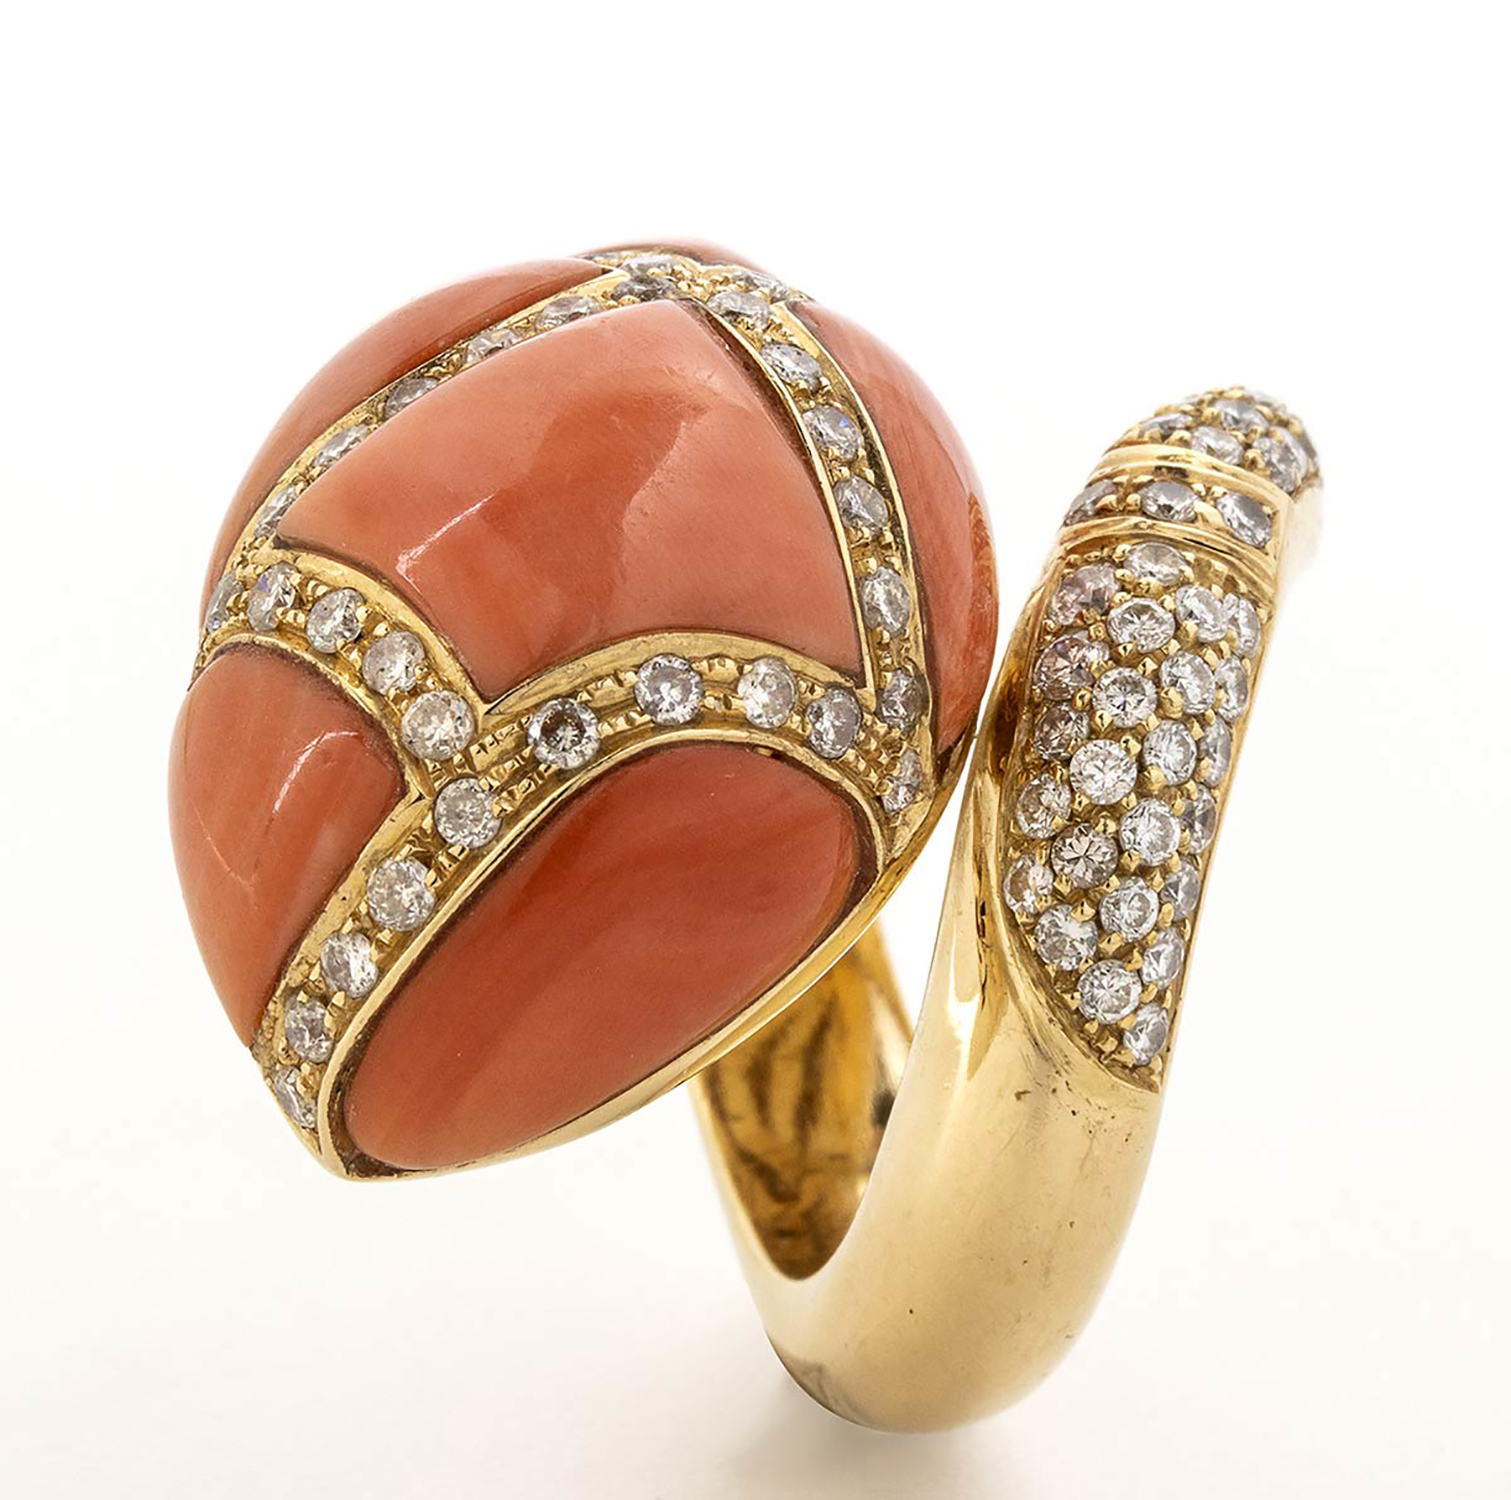 Cerasuolo coral and diamonds ring - Image 3 of 6